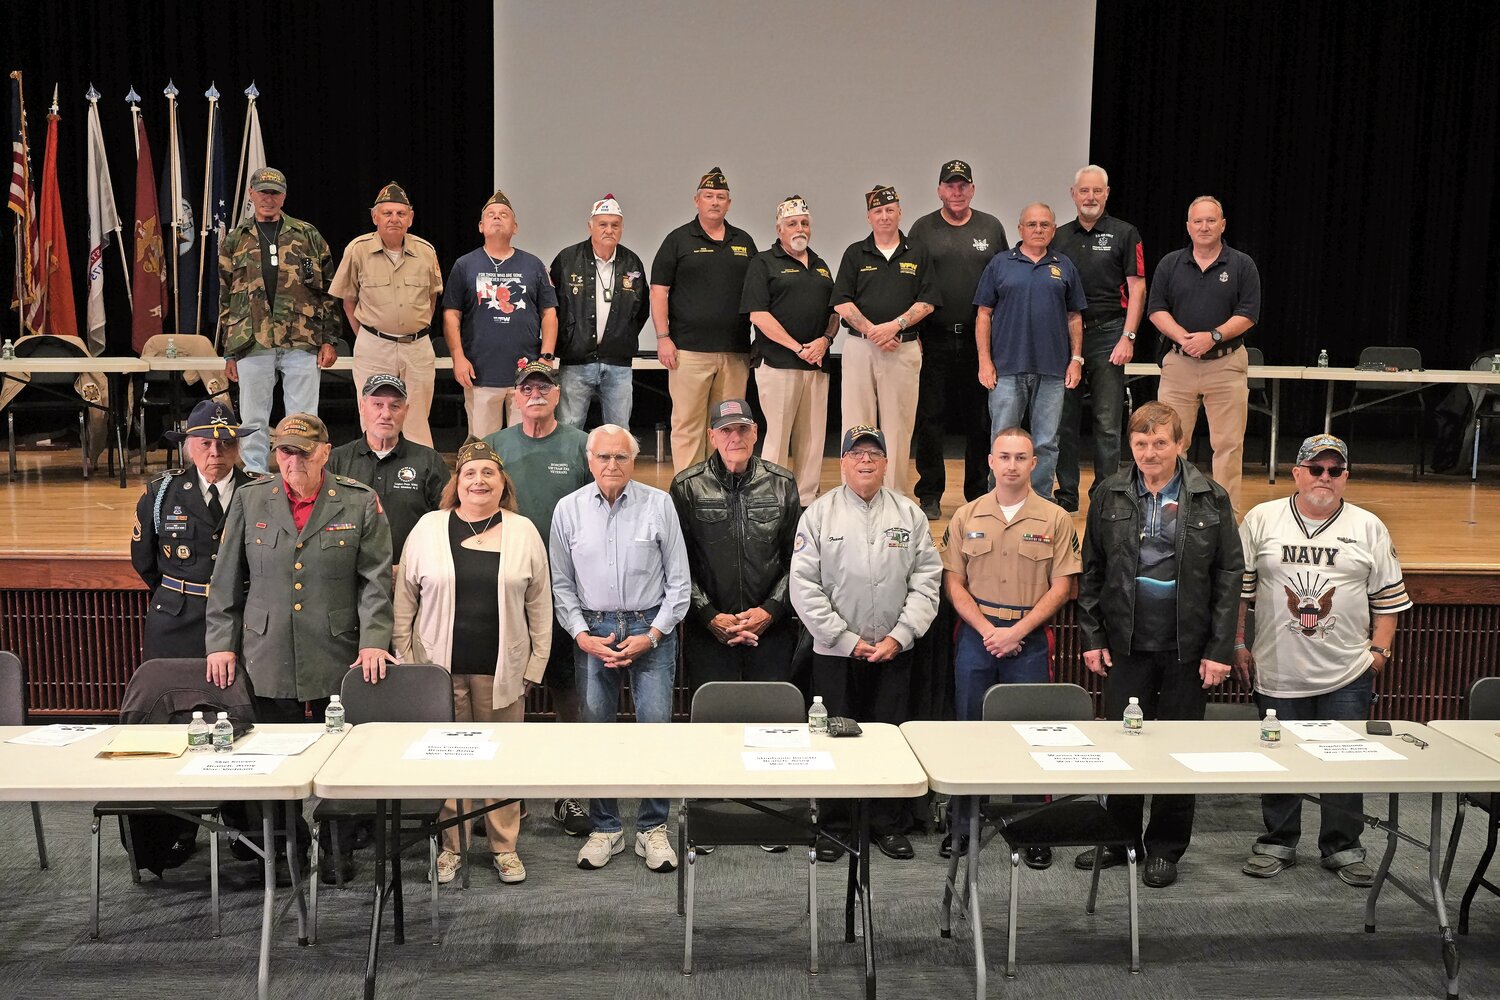 Twenty local veterans visited East Meadow High School and shared their experiences with the students.